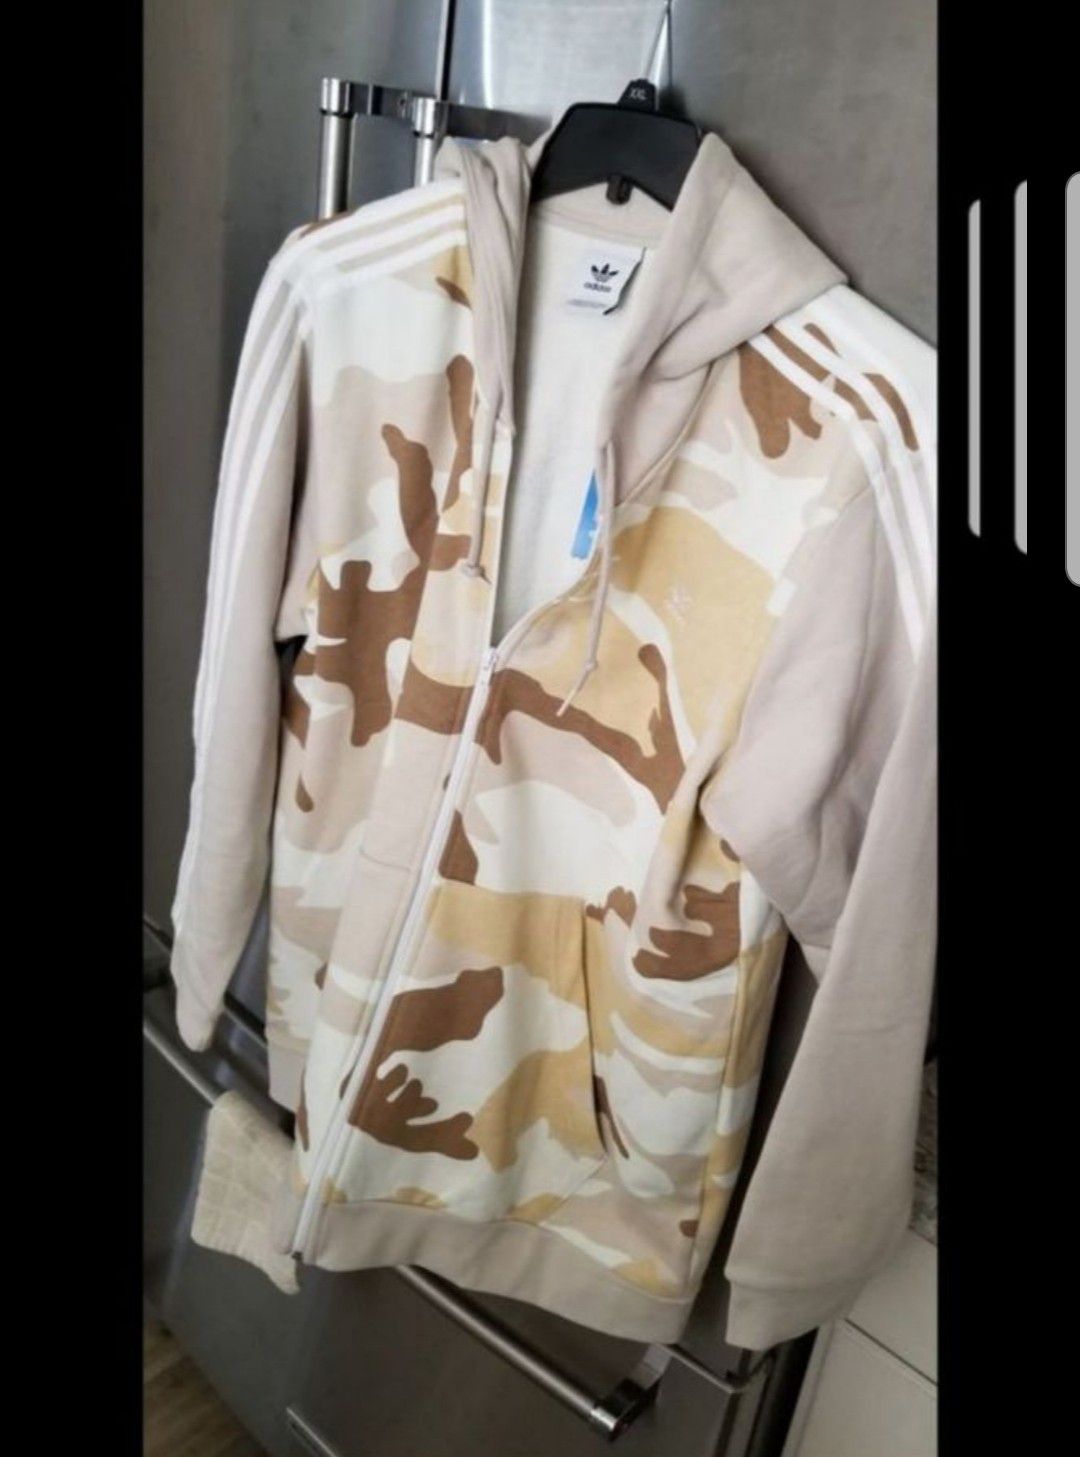 Adidas Camo hoodie. Size XXL. Brand new with tags. Please check out my page for other items. Thanks